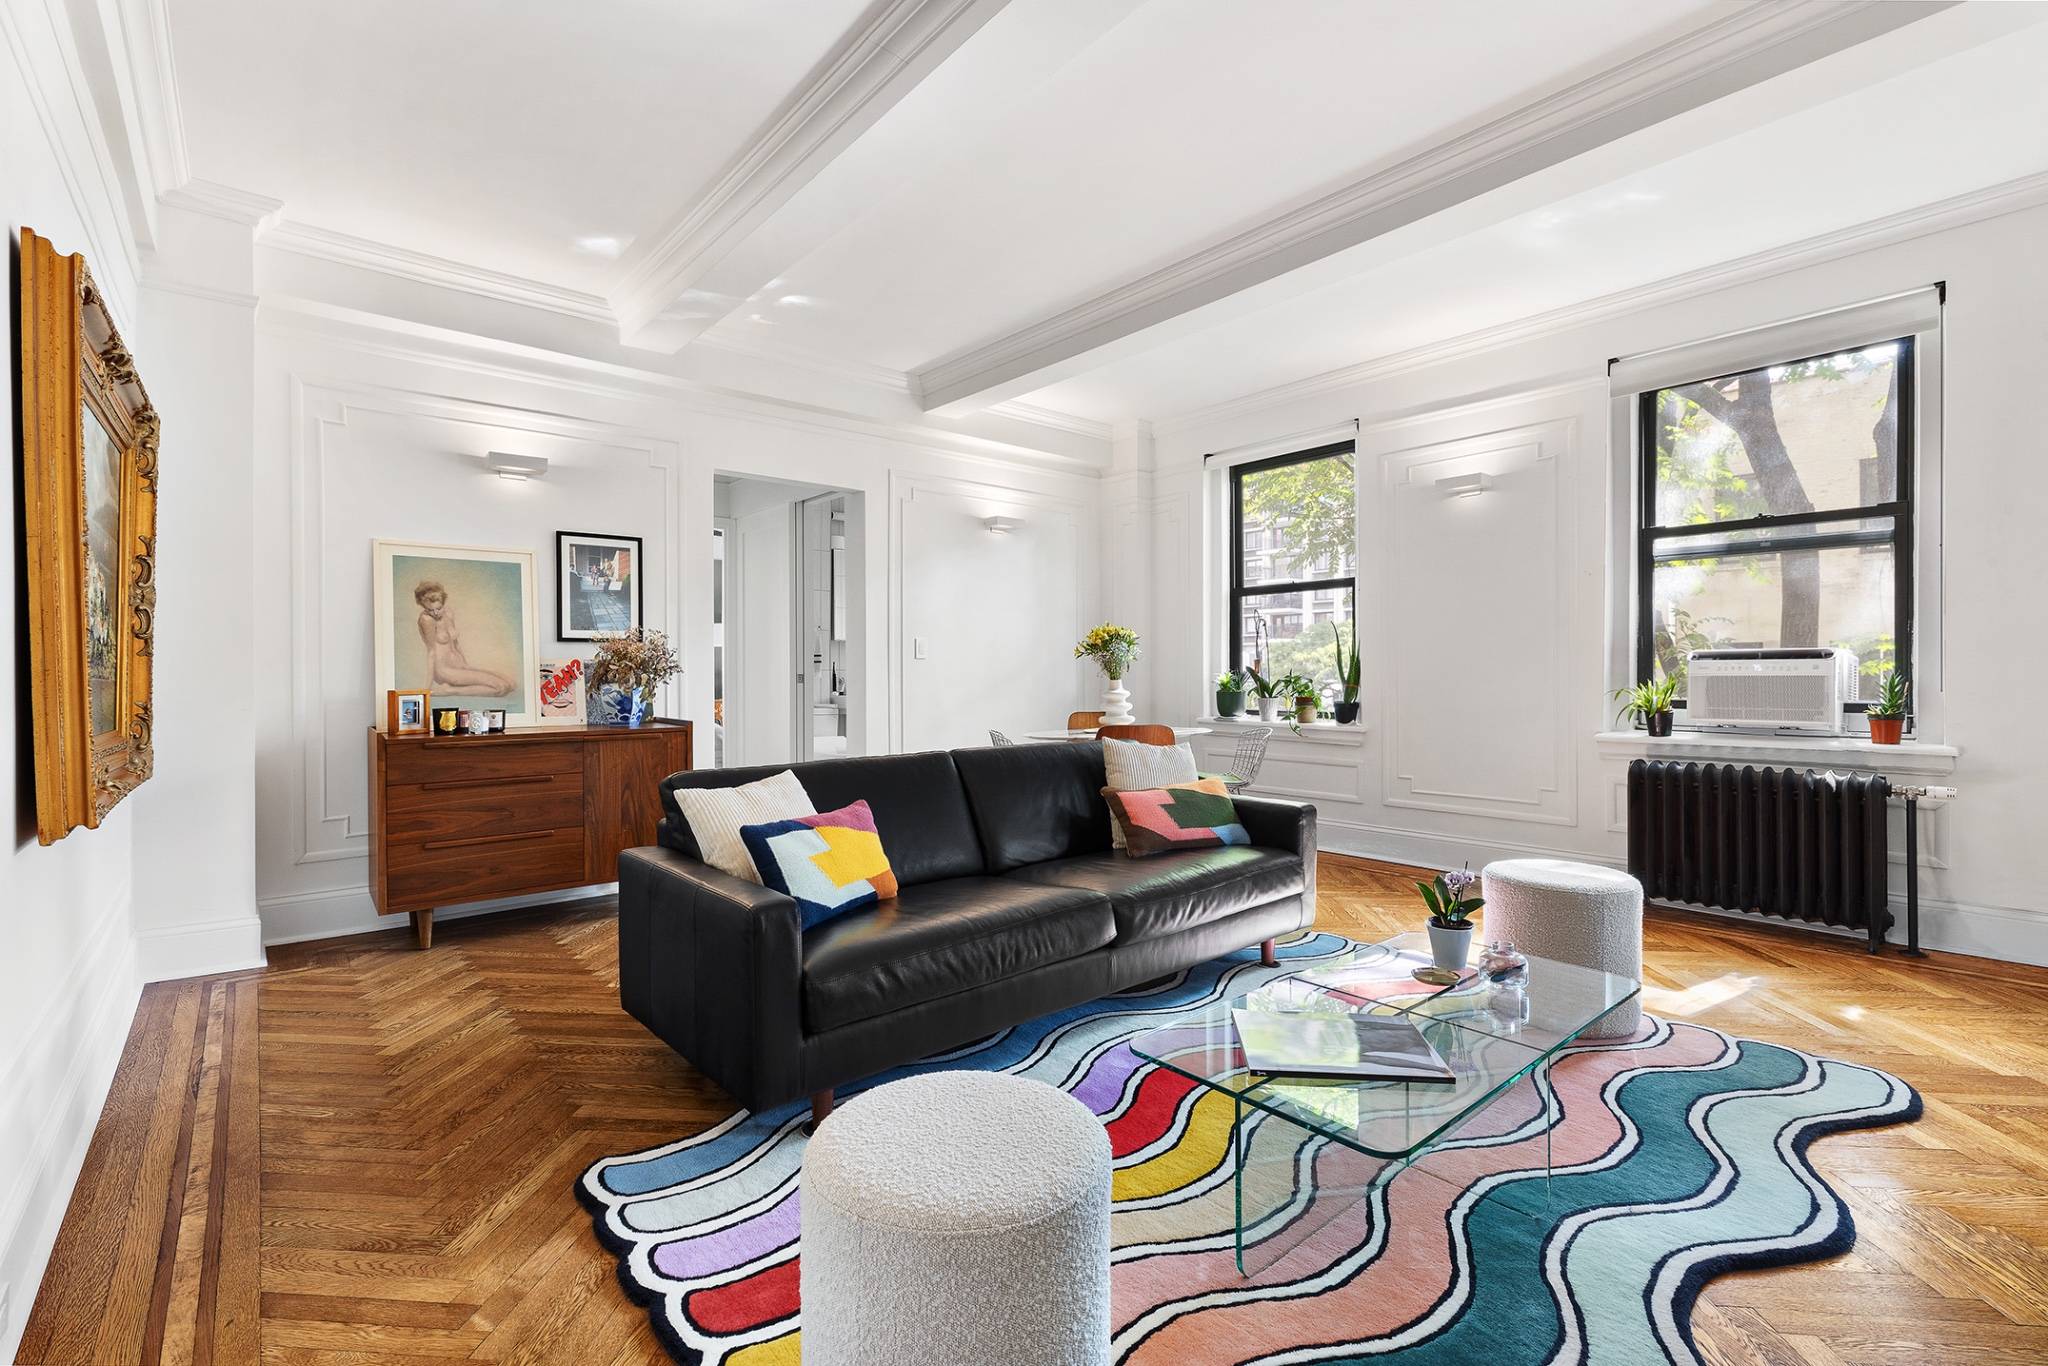 SPACIOUS, FURNISHED or UNFURNISHED, and NEWLY RENOVATED UWS rental for a year long lease.